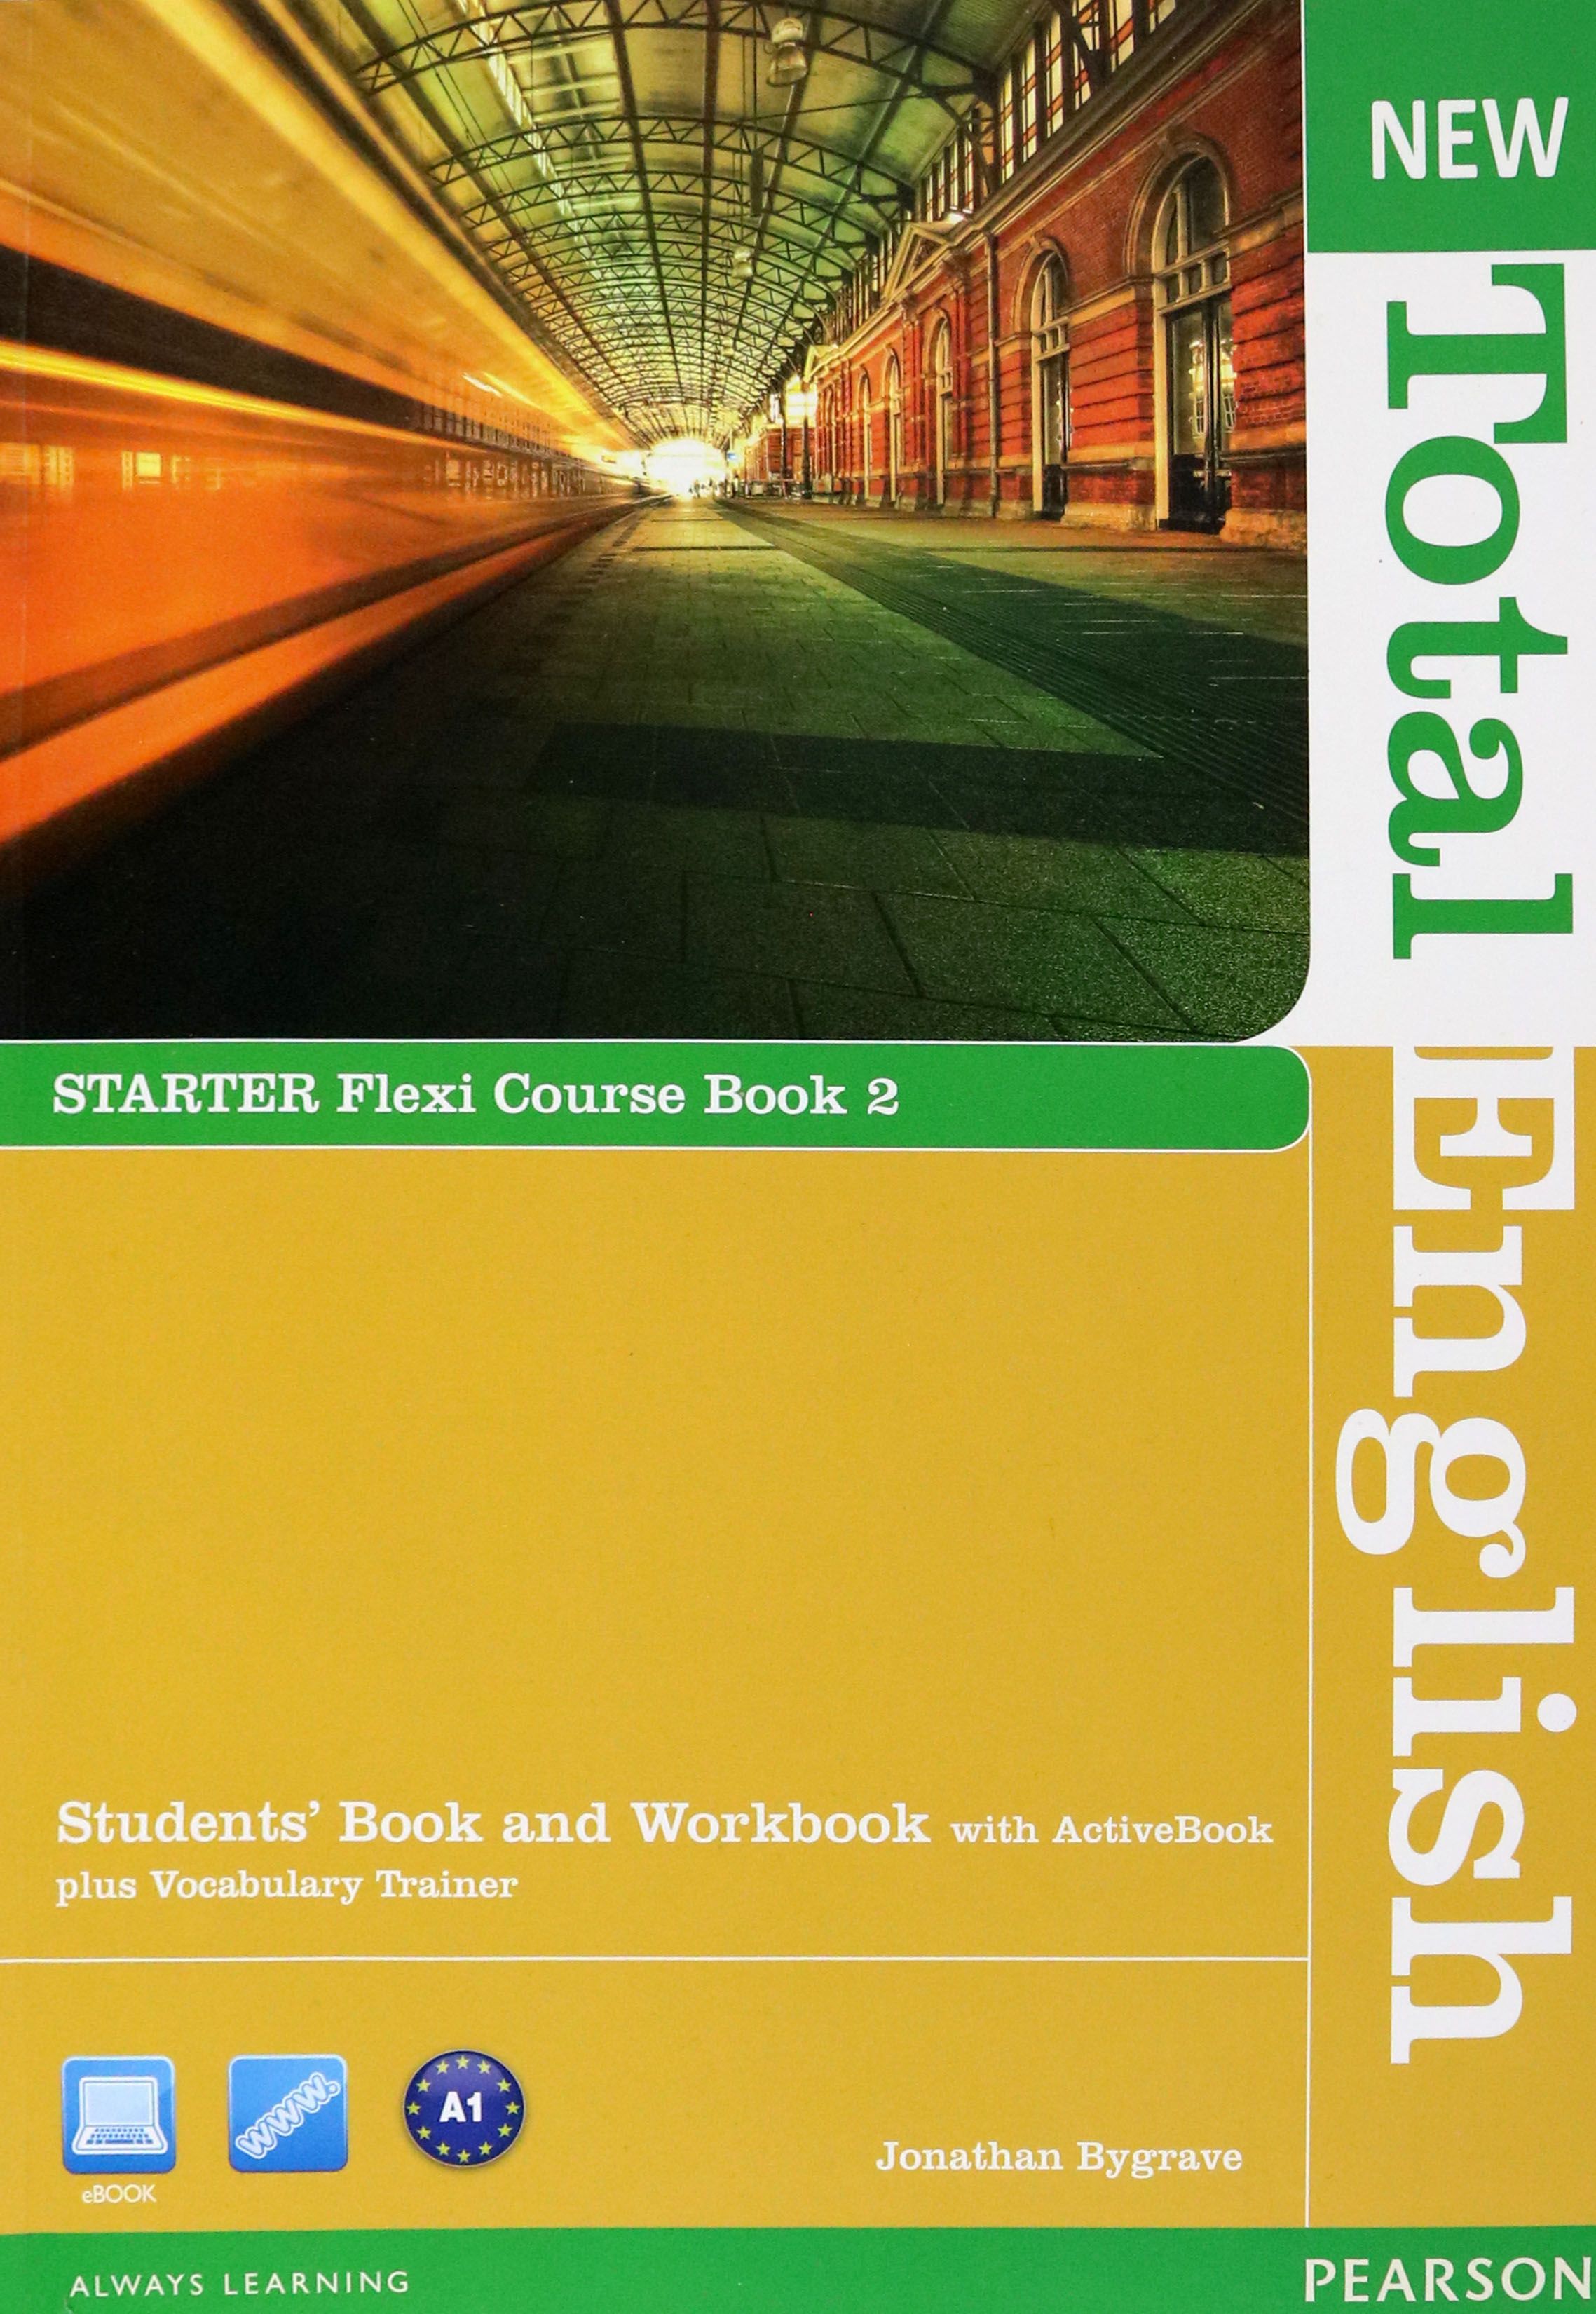 New total english students book